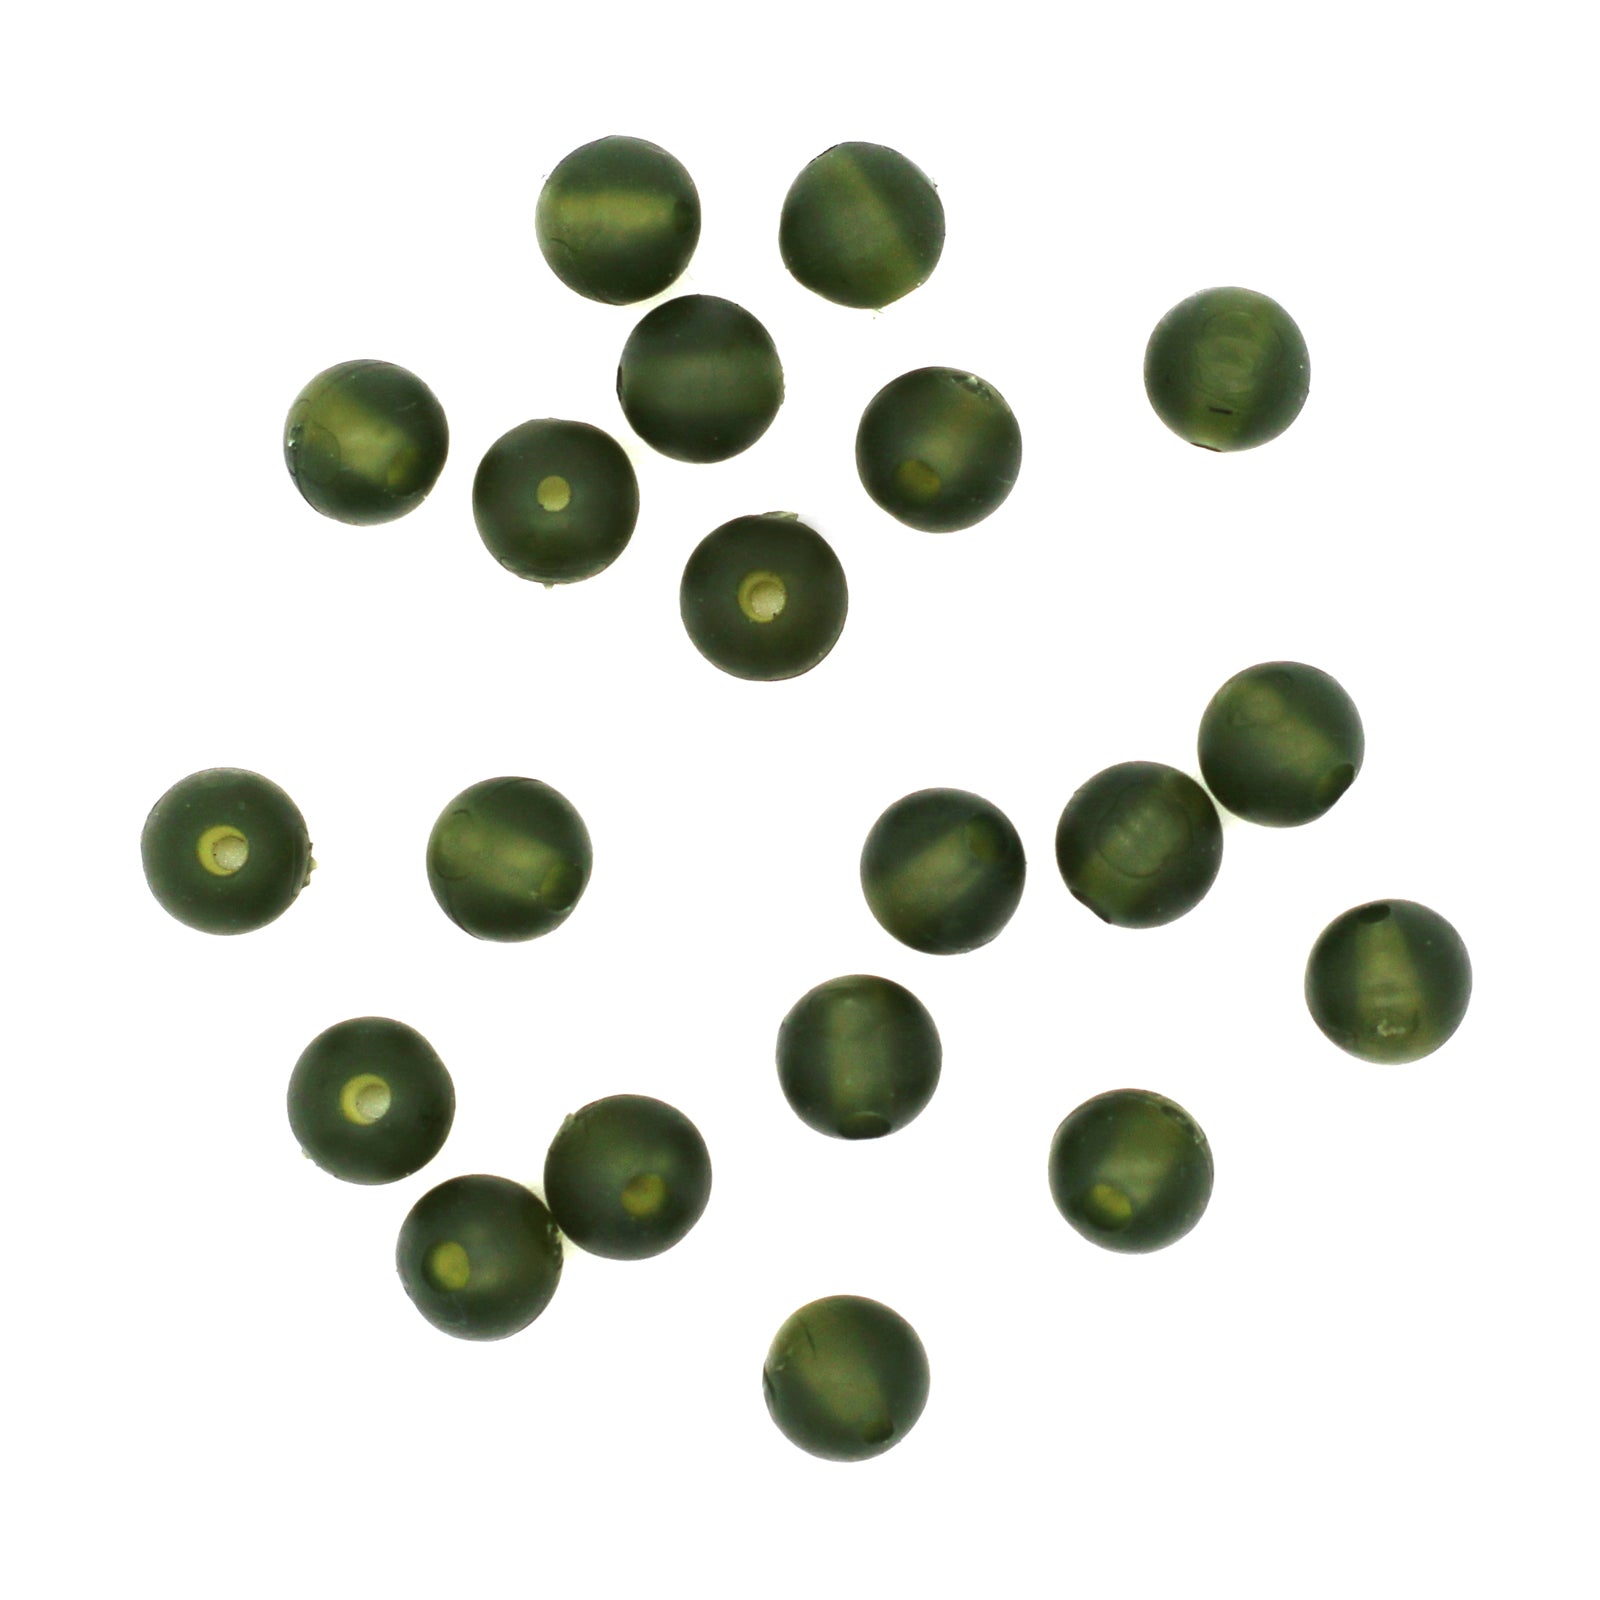 Deception Angling Tapered Chod Beads for Fishing Pack of 20 in Green